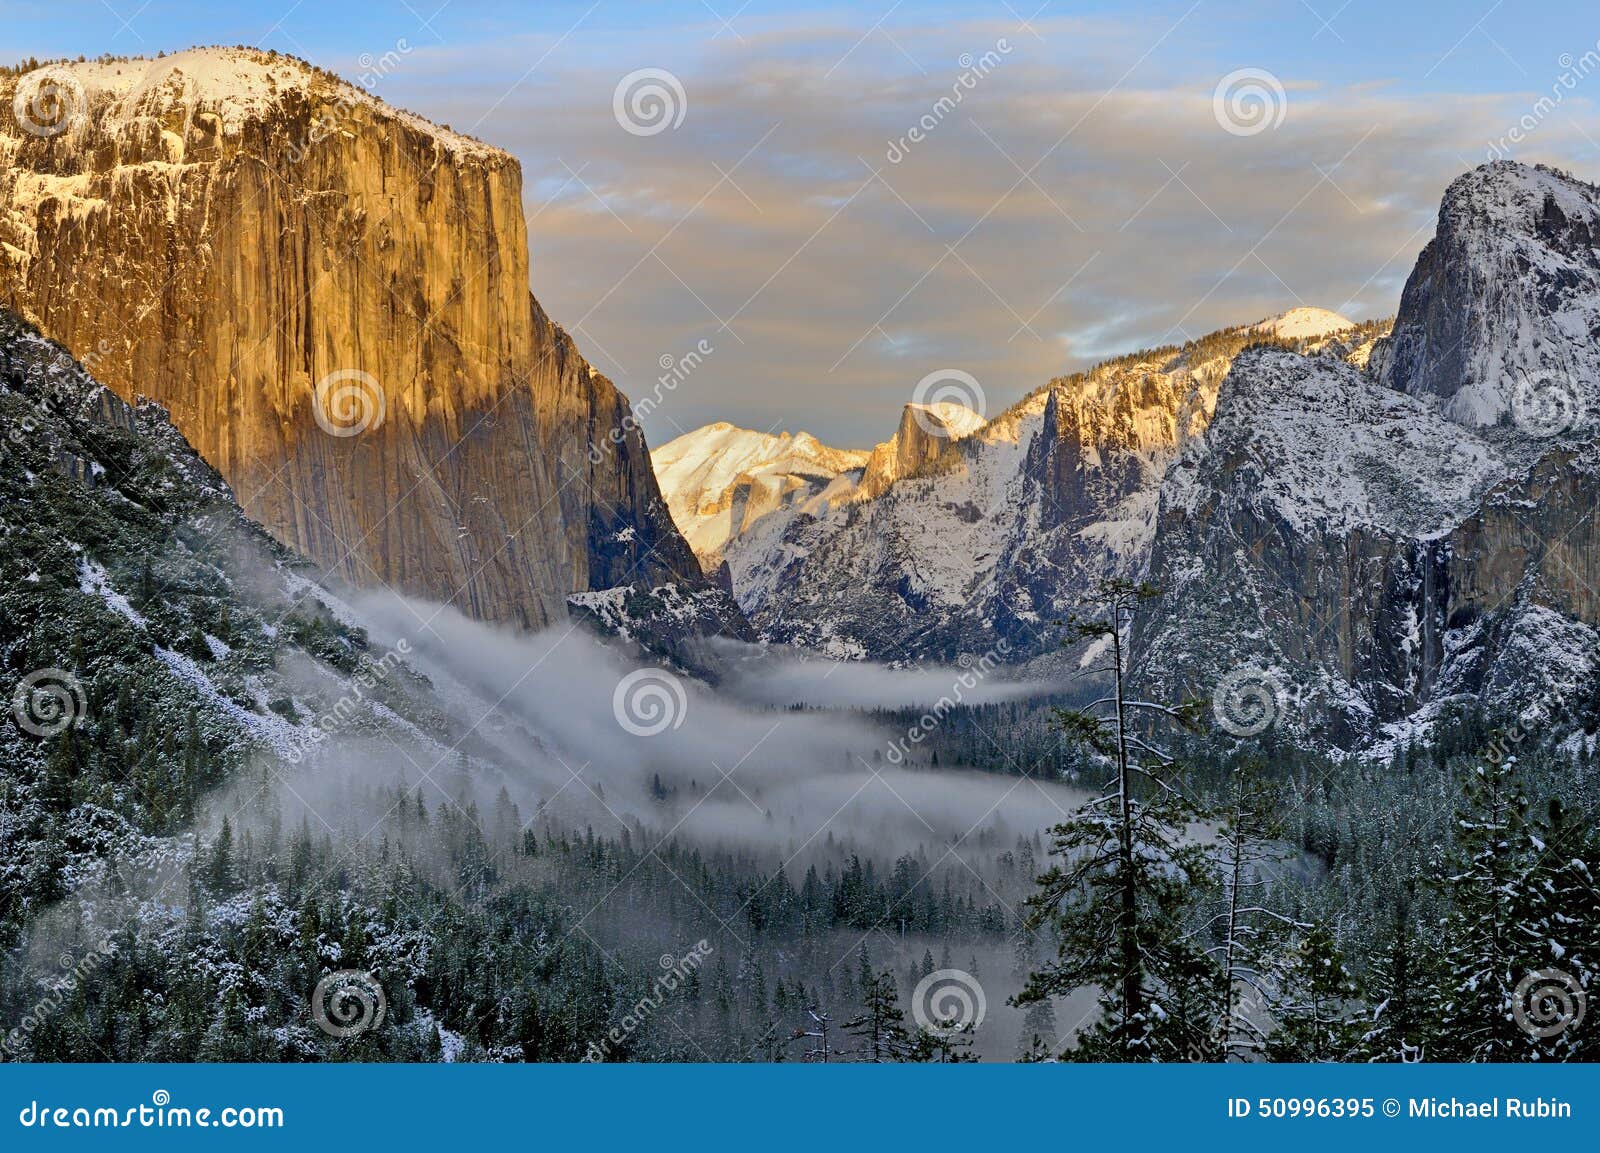 view from tunnel view of foggy yosemite valley, yosemite national park